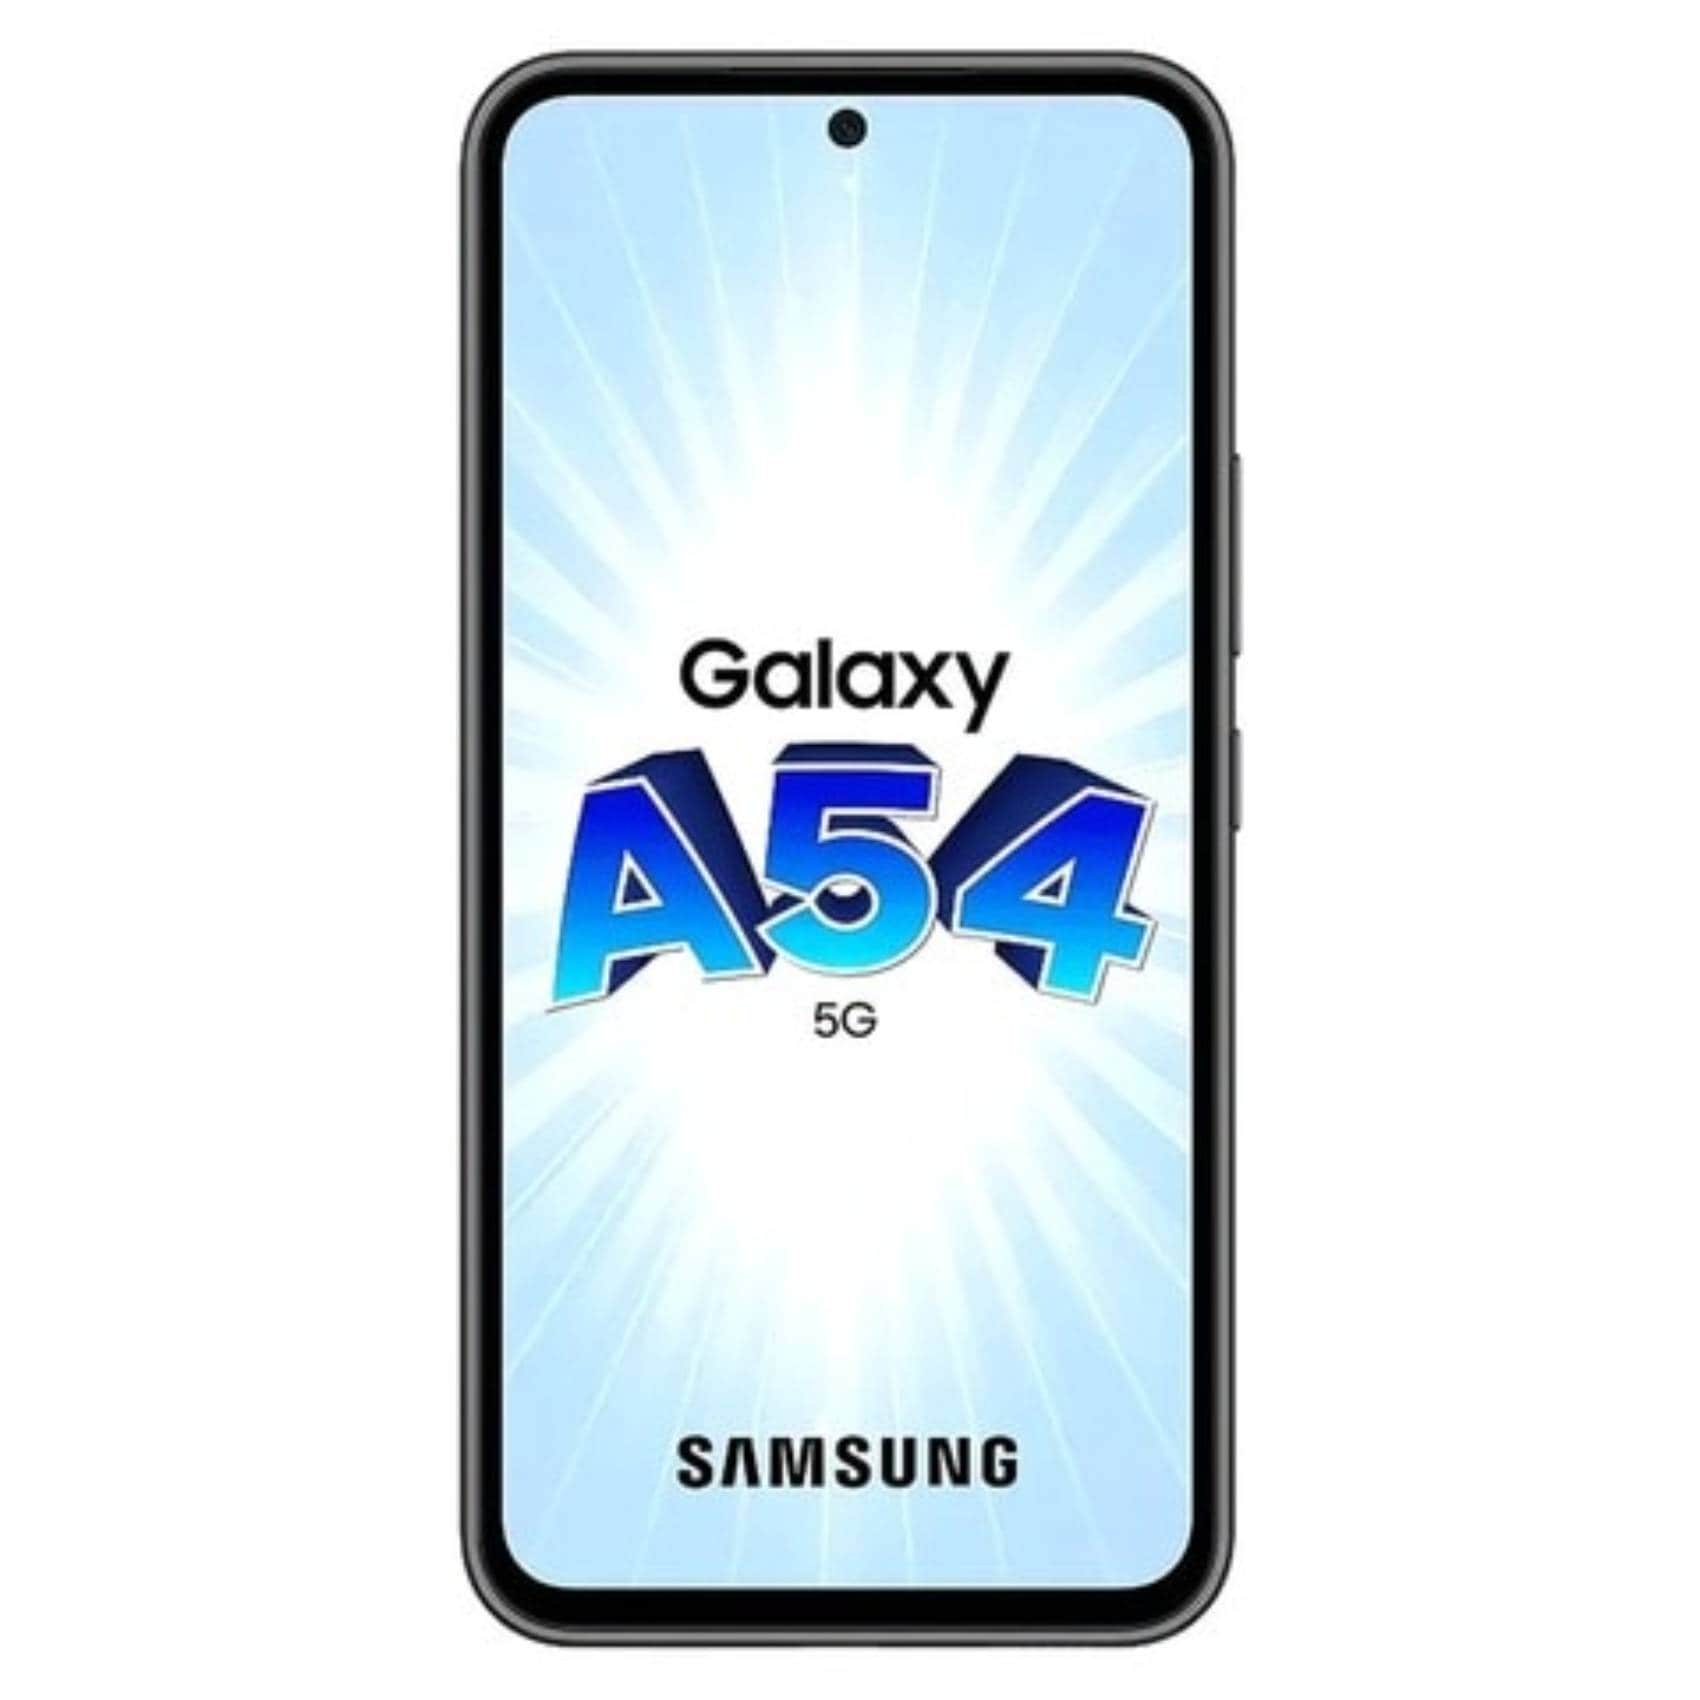  SAMSUNG Galaxy A54 5G + 4G LTE (256GB + 8GB) Unlocked Worldwide  Dual Sim (Only T-Mobile/Mint/Metro USA Market) 6.4 120Hz 50MP Triple Cam +  (25W Fast Wall Charger) (Awesome Lime (SM-A546M)) 